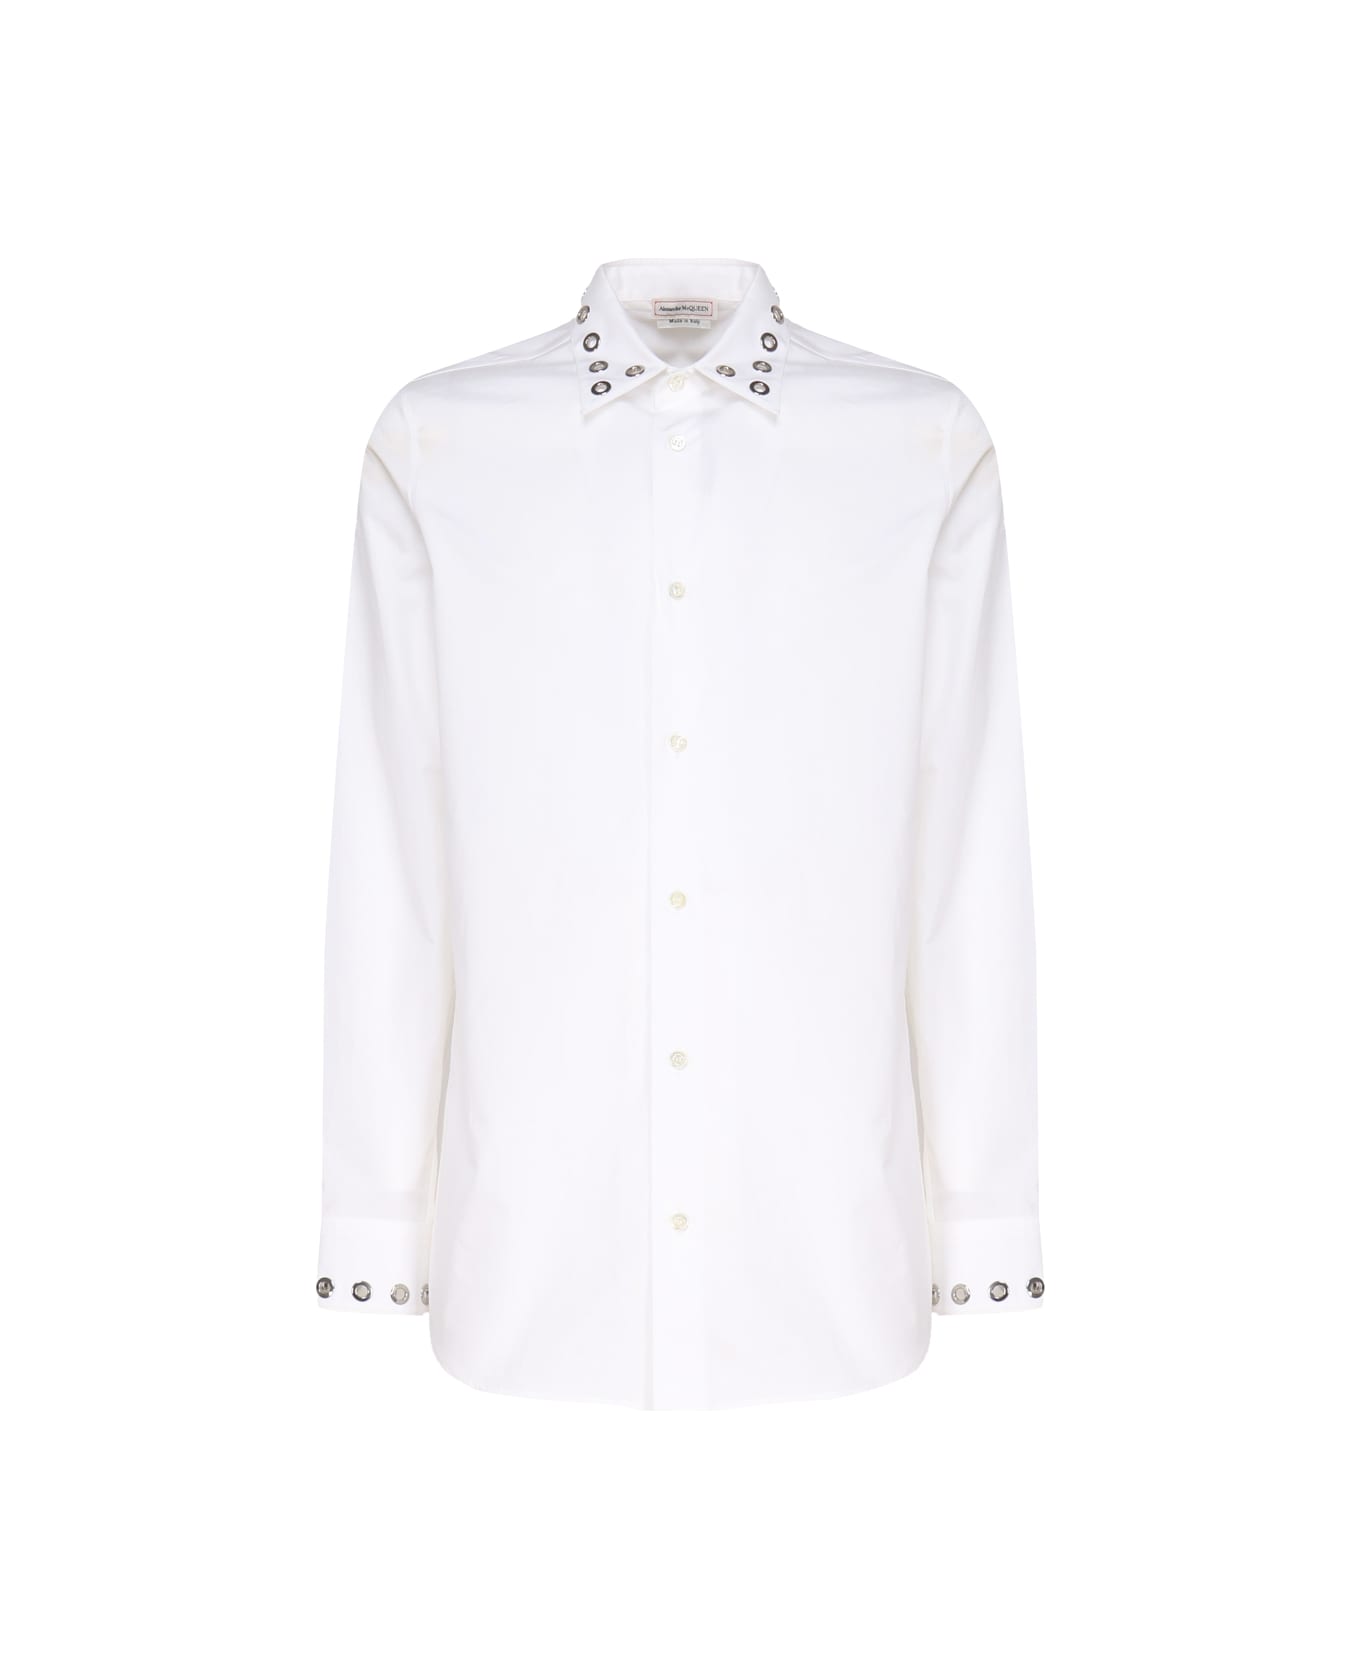 Alexander McQueen Shirt With Studded Collar And Cuffs - White